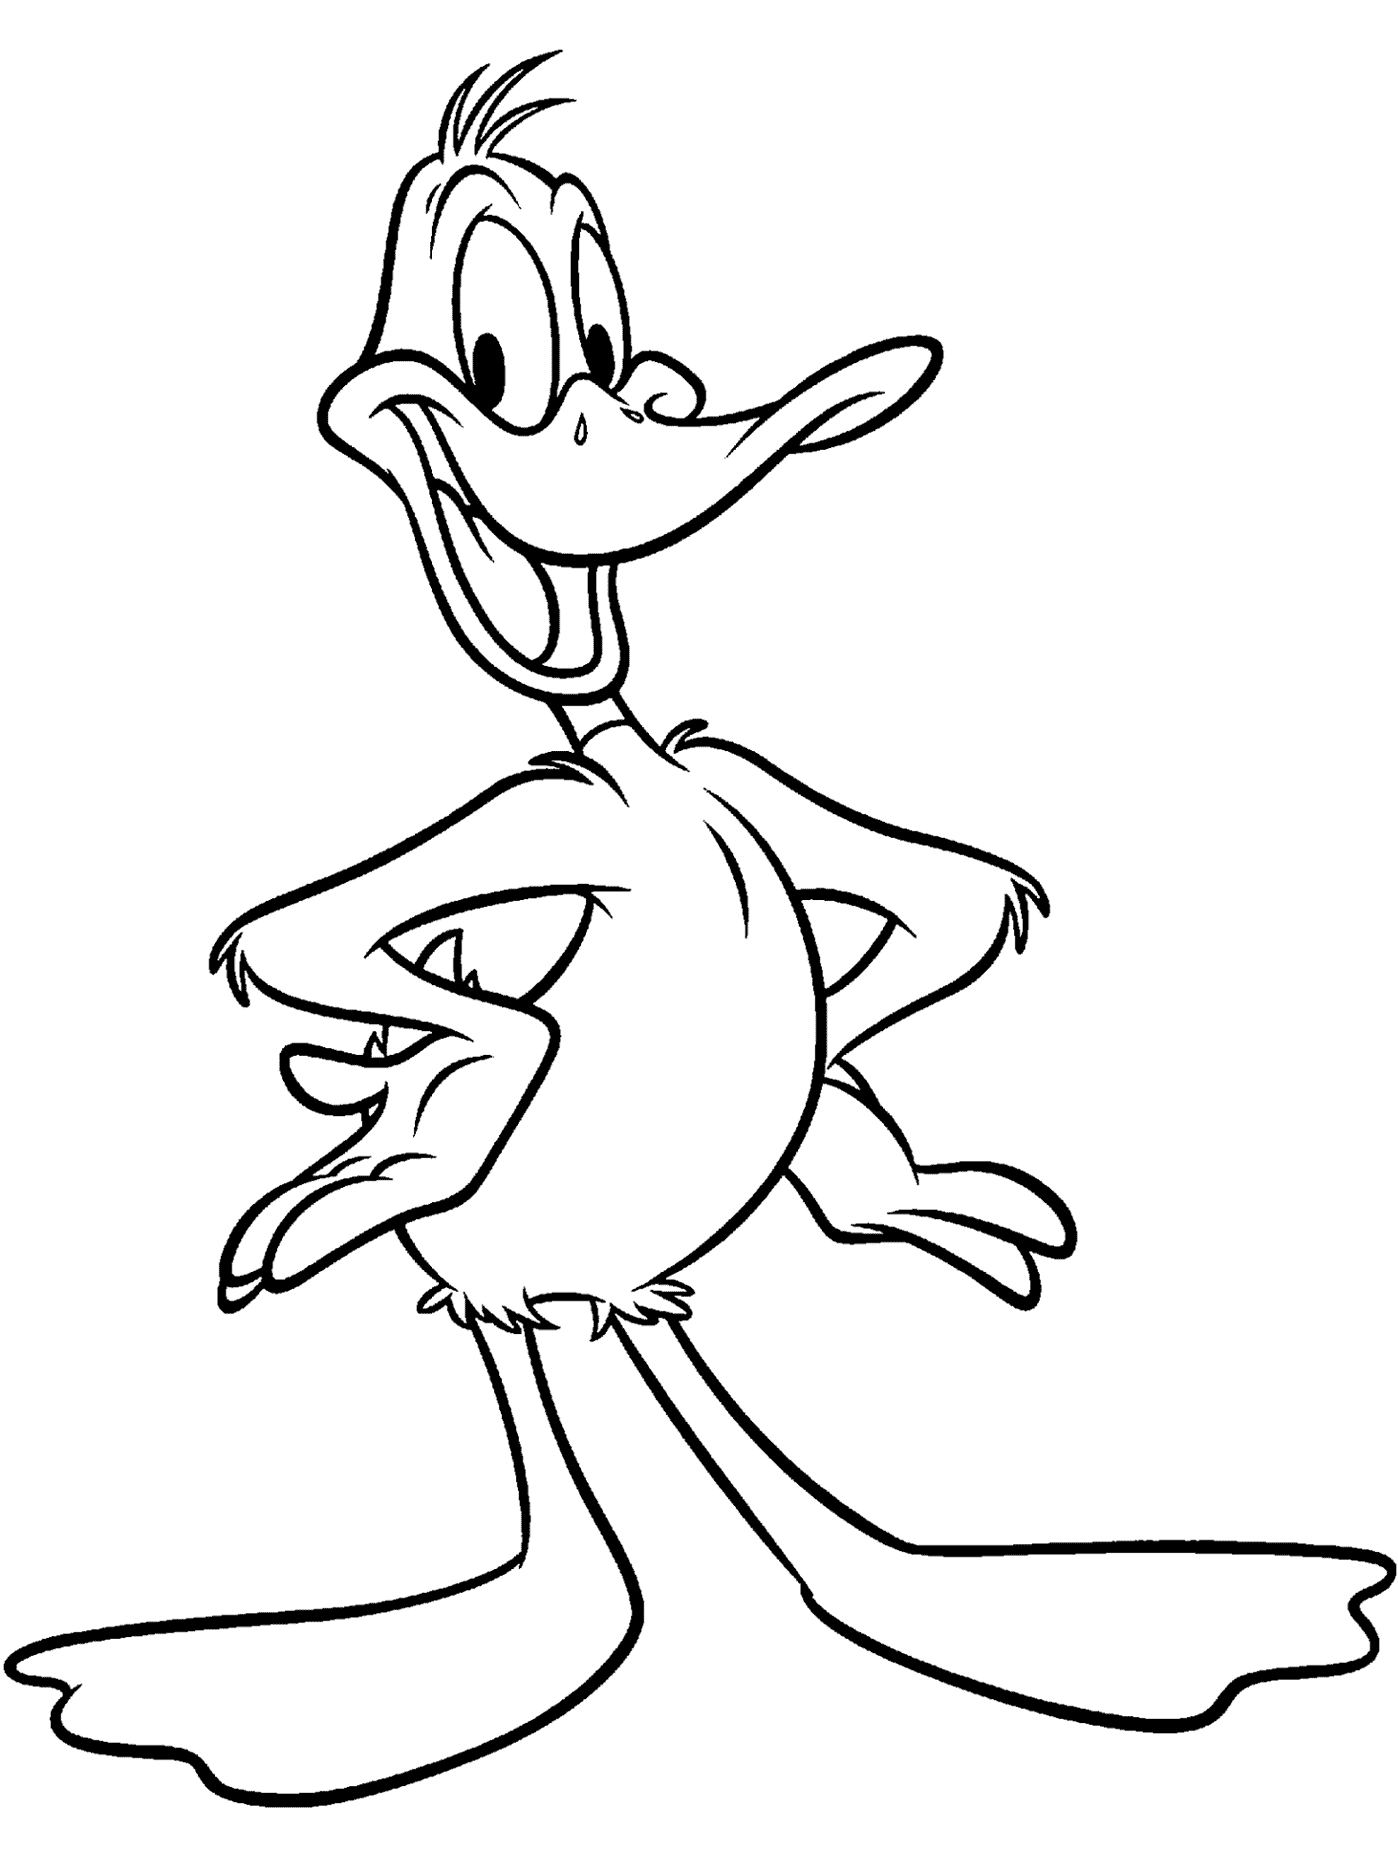 Coloring Page Duck Daffy Duck Coloring Page Looney Tunes Spot Coloring Pages